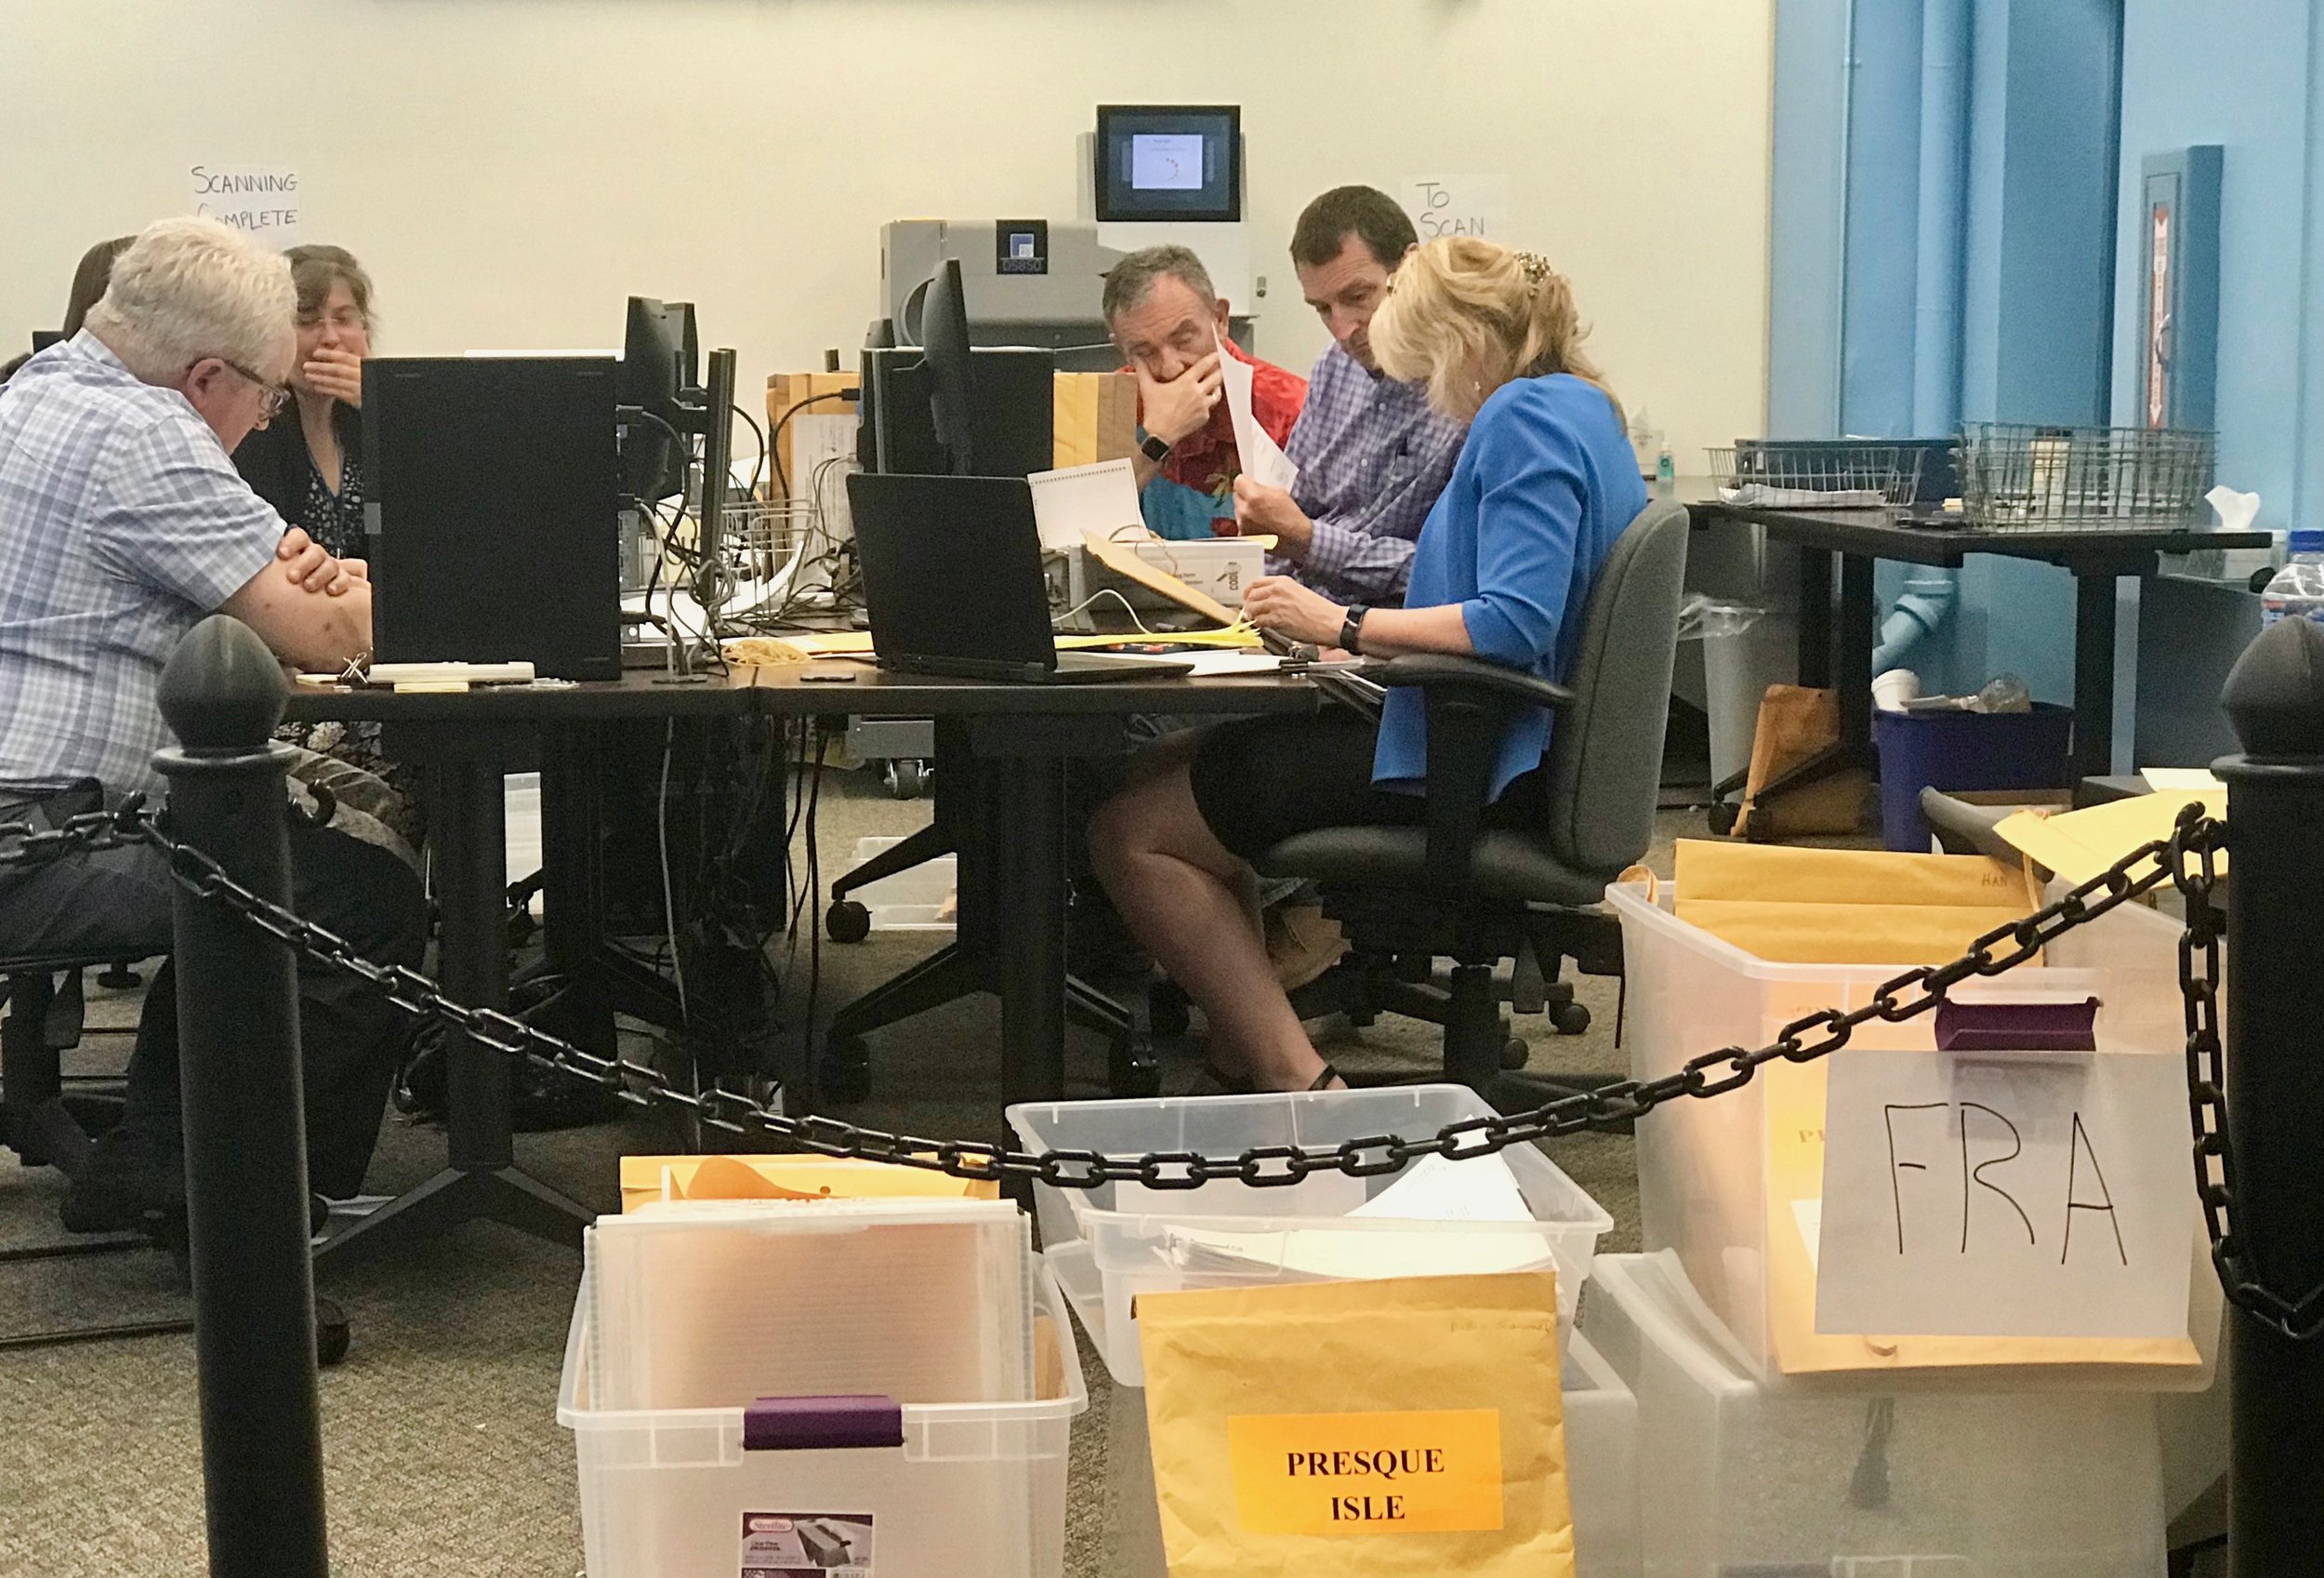  Maine election workers certify ballots before running the ranked-choice voting program to determine the final results of the June 12 primary. 